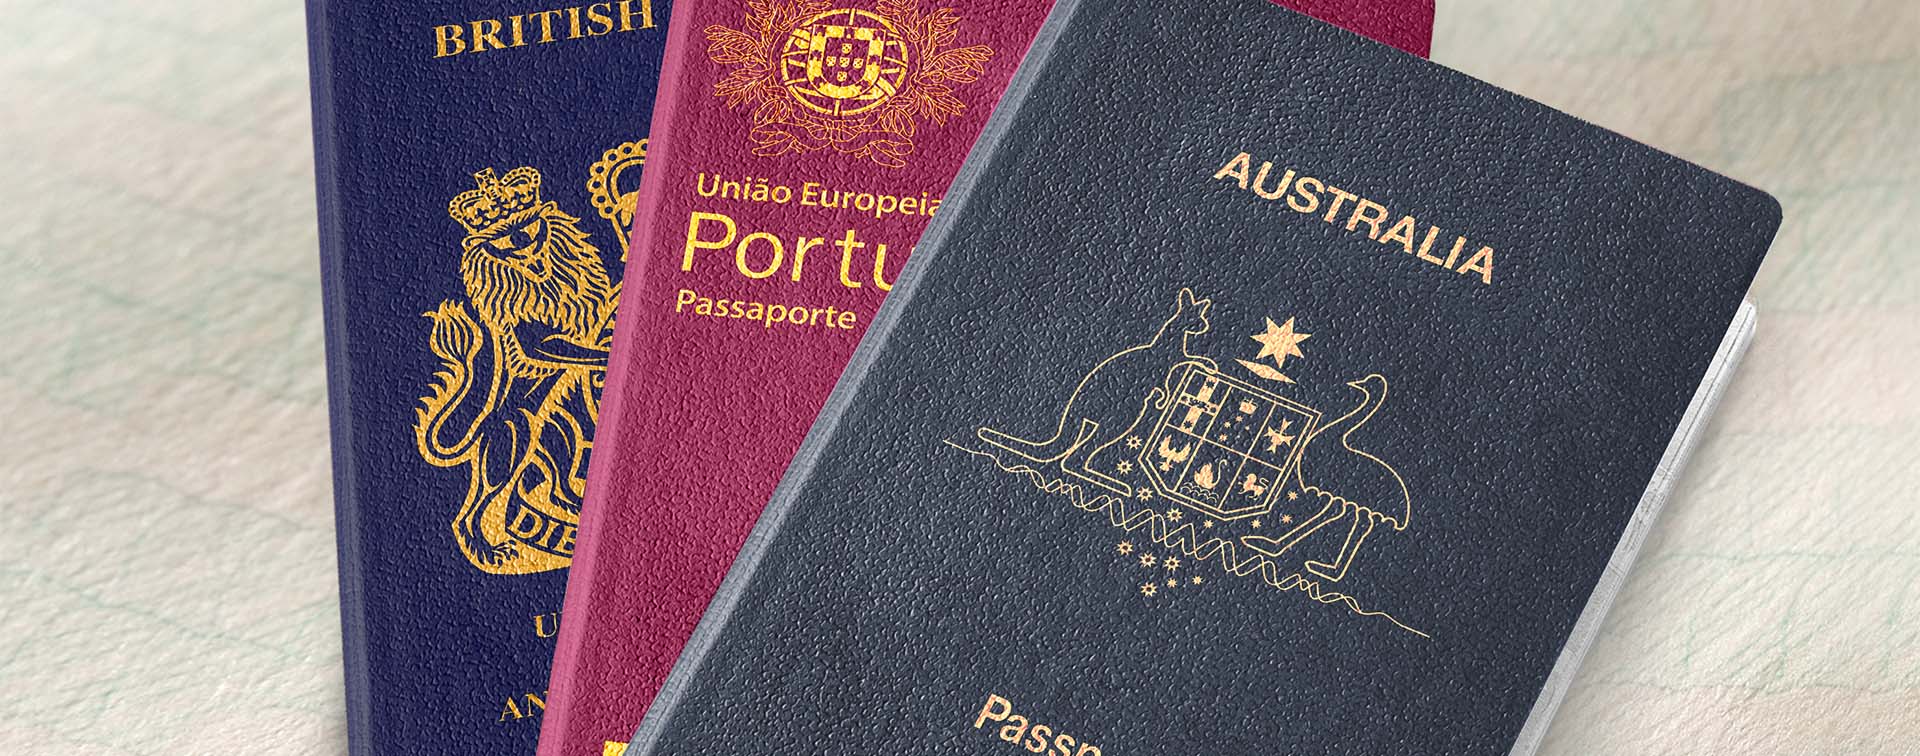 Australian, Portuguese, and British passports fanned out on top of one another